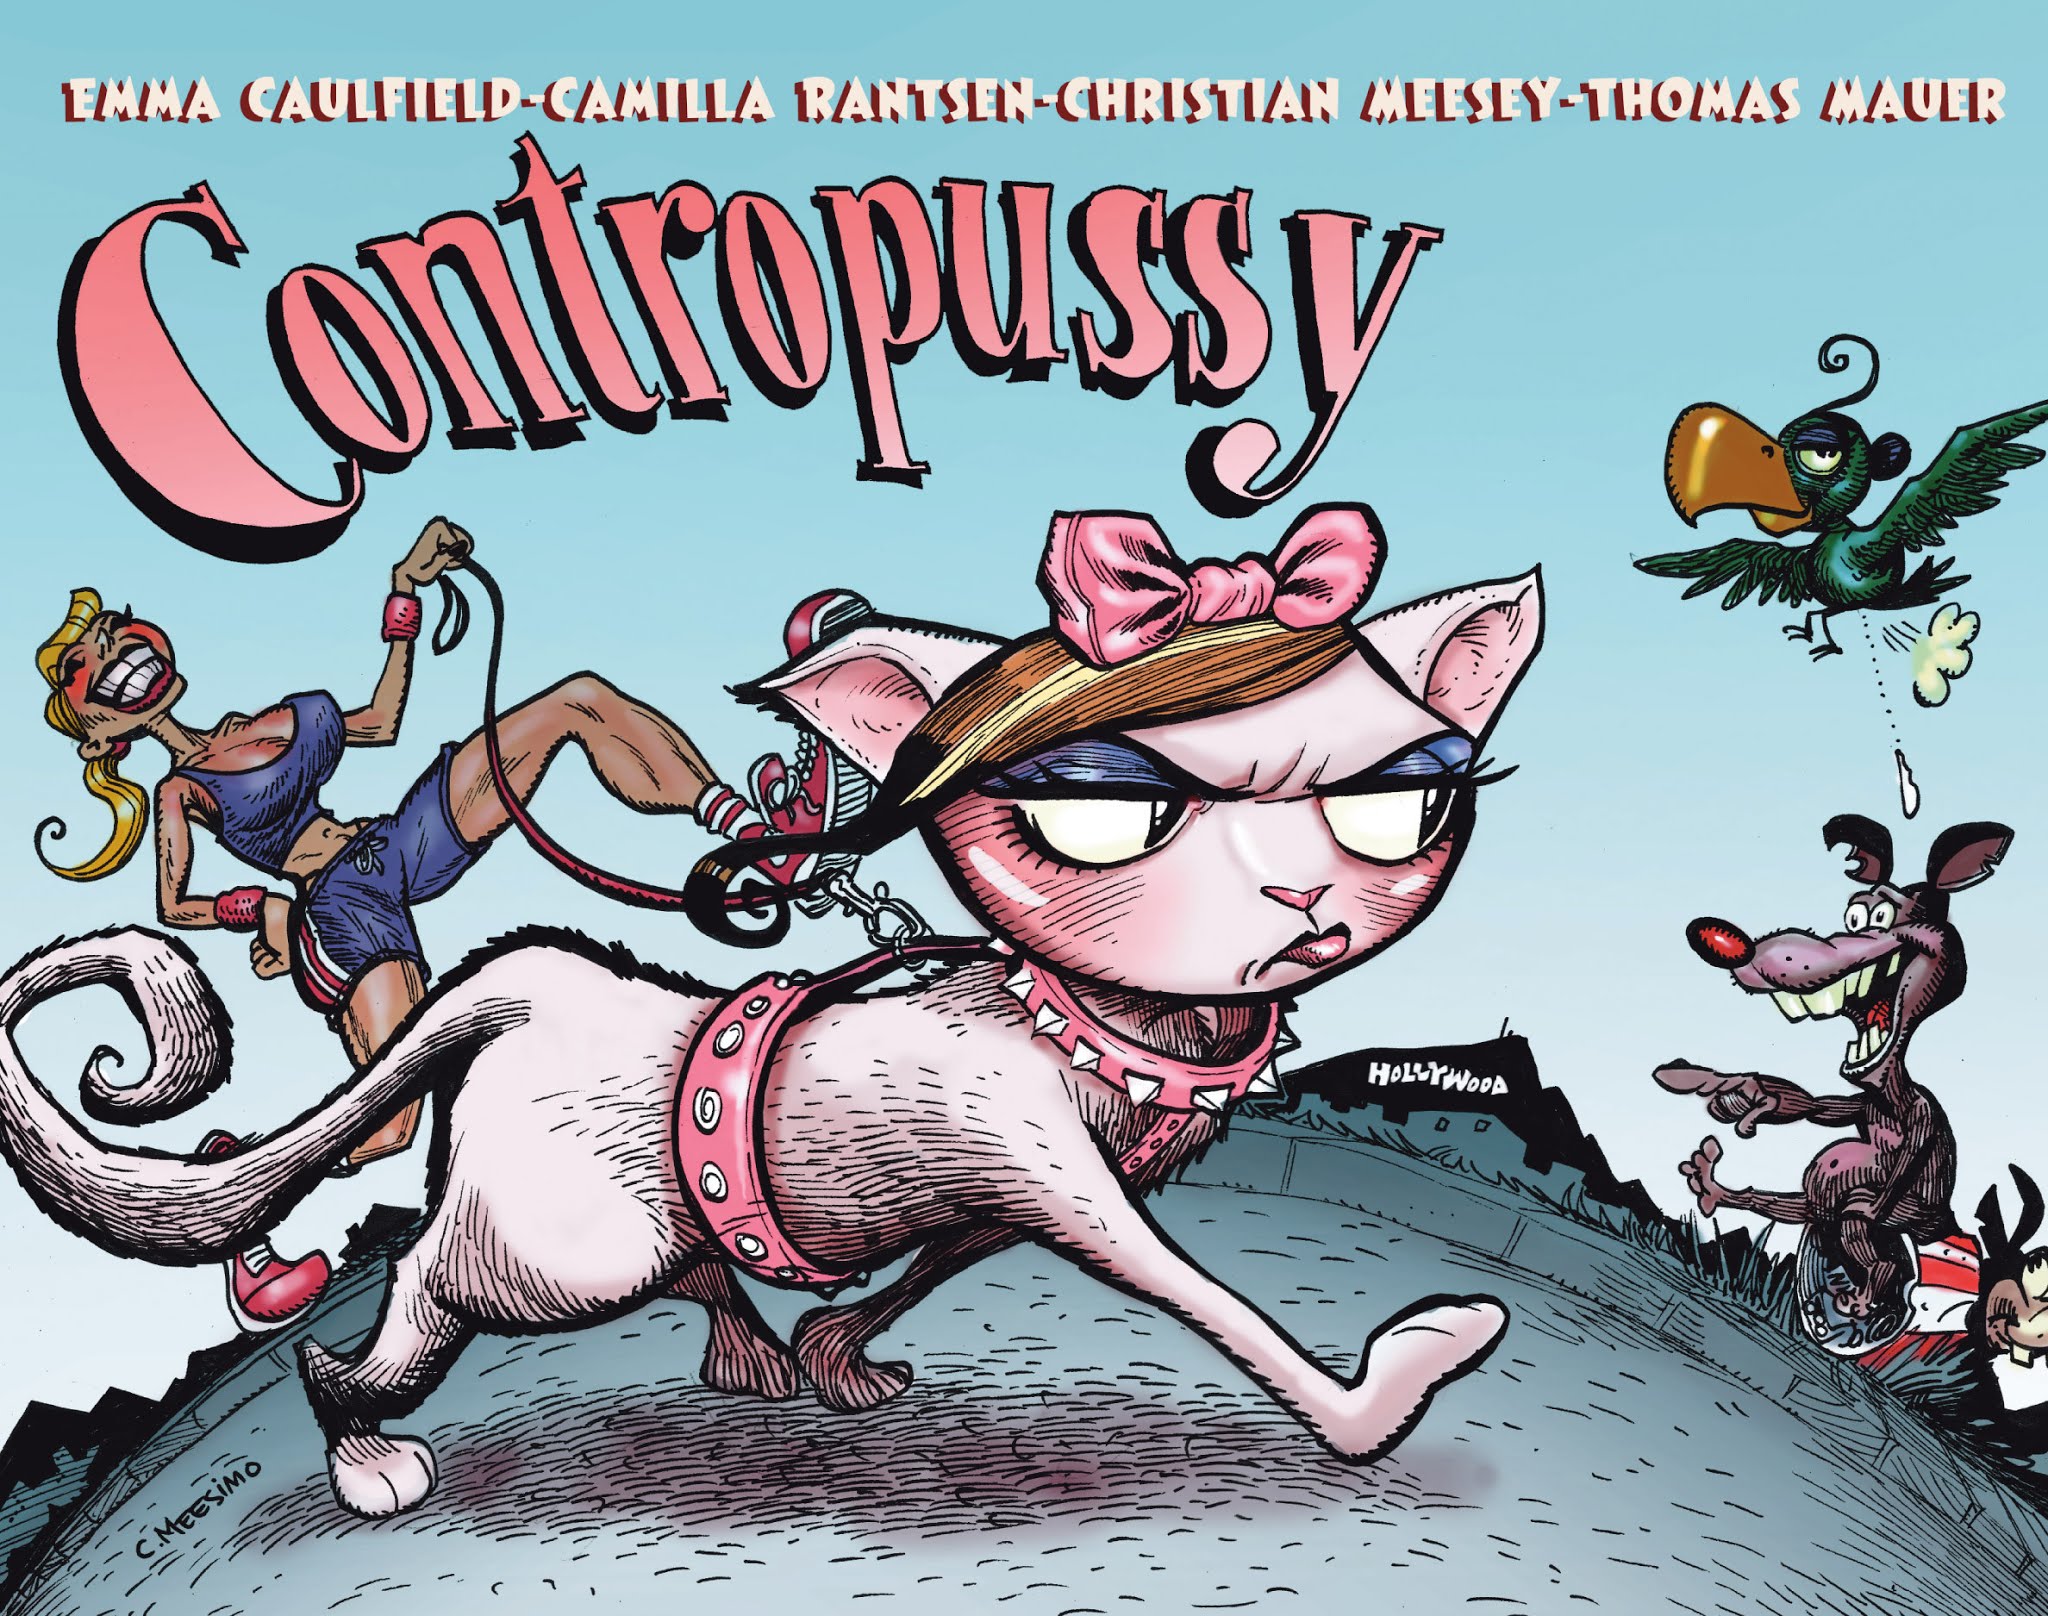 Read online Contropussy comic -  Issue # TPB - 1